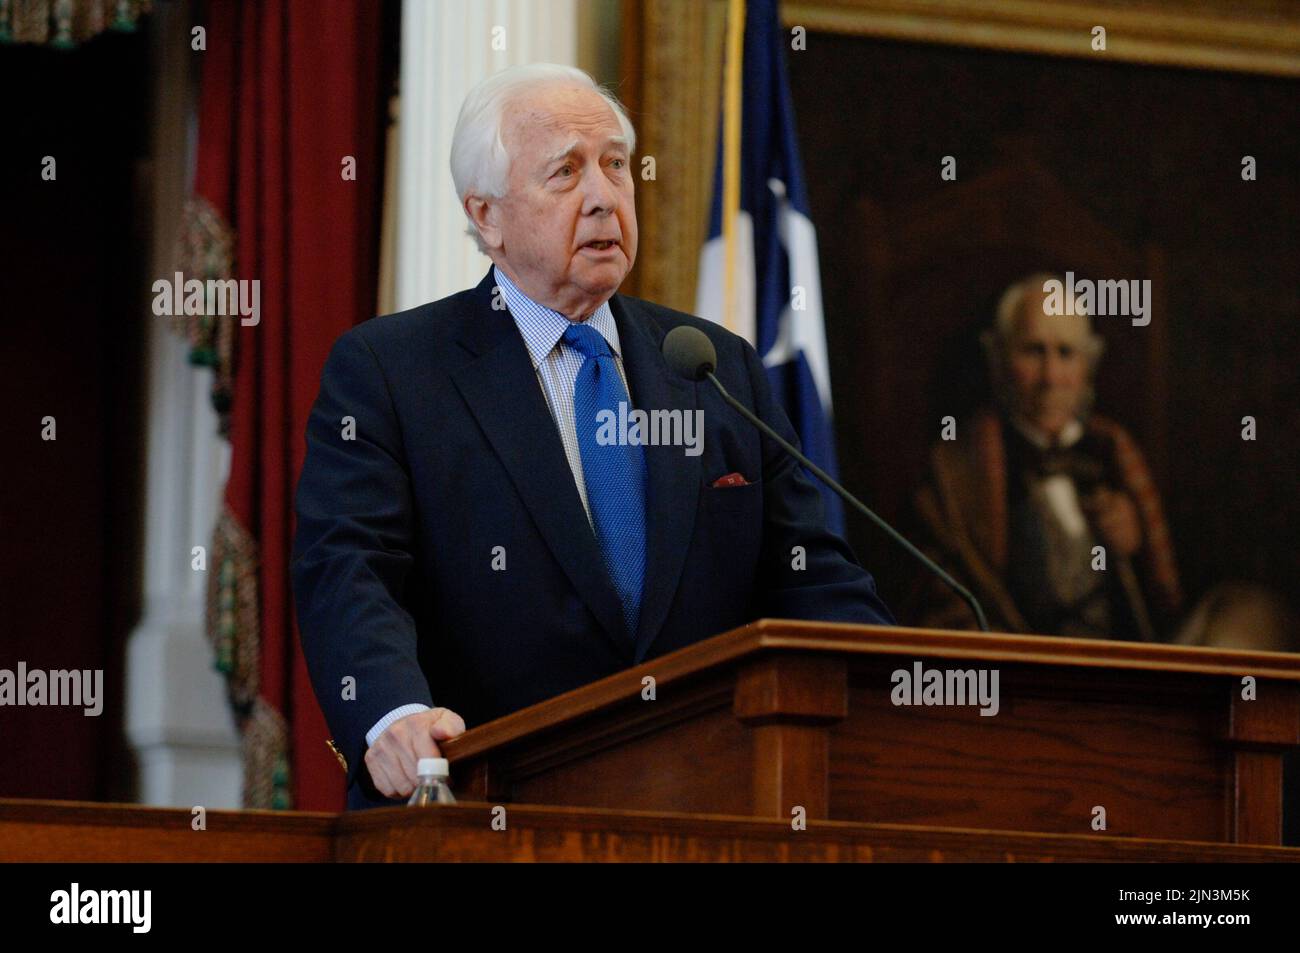 Austin, TX, USA. 28th Oct, 2005. Author DAVID MCCULLOUGH, two-time Pulitzer Prize and National Book Award winner, whose best-selling biographies of Harry Truman and John Adams made him one of America's most popular and acclaimed historians, died at 89. McCullough, who won the prizes for biographies on Truman (1992) and Adams (2001), was a featured author at the 2005 Texas Book Festival in Austin. (Credit Image: © Bob Daemmrich/ZUMA Press Wire) Stock Photo